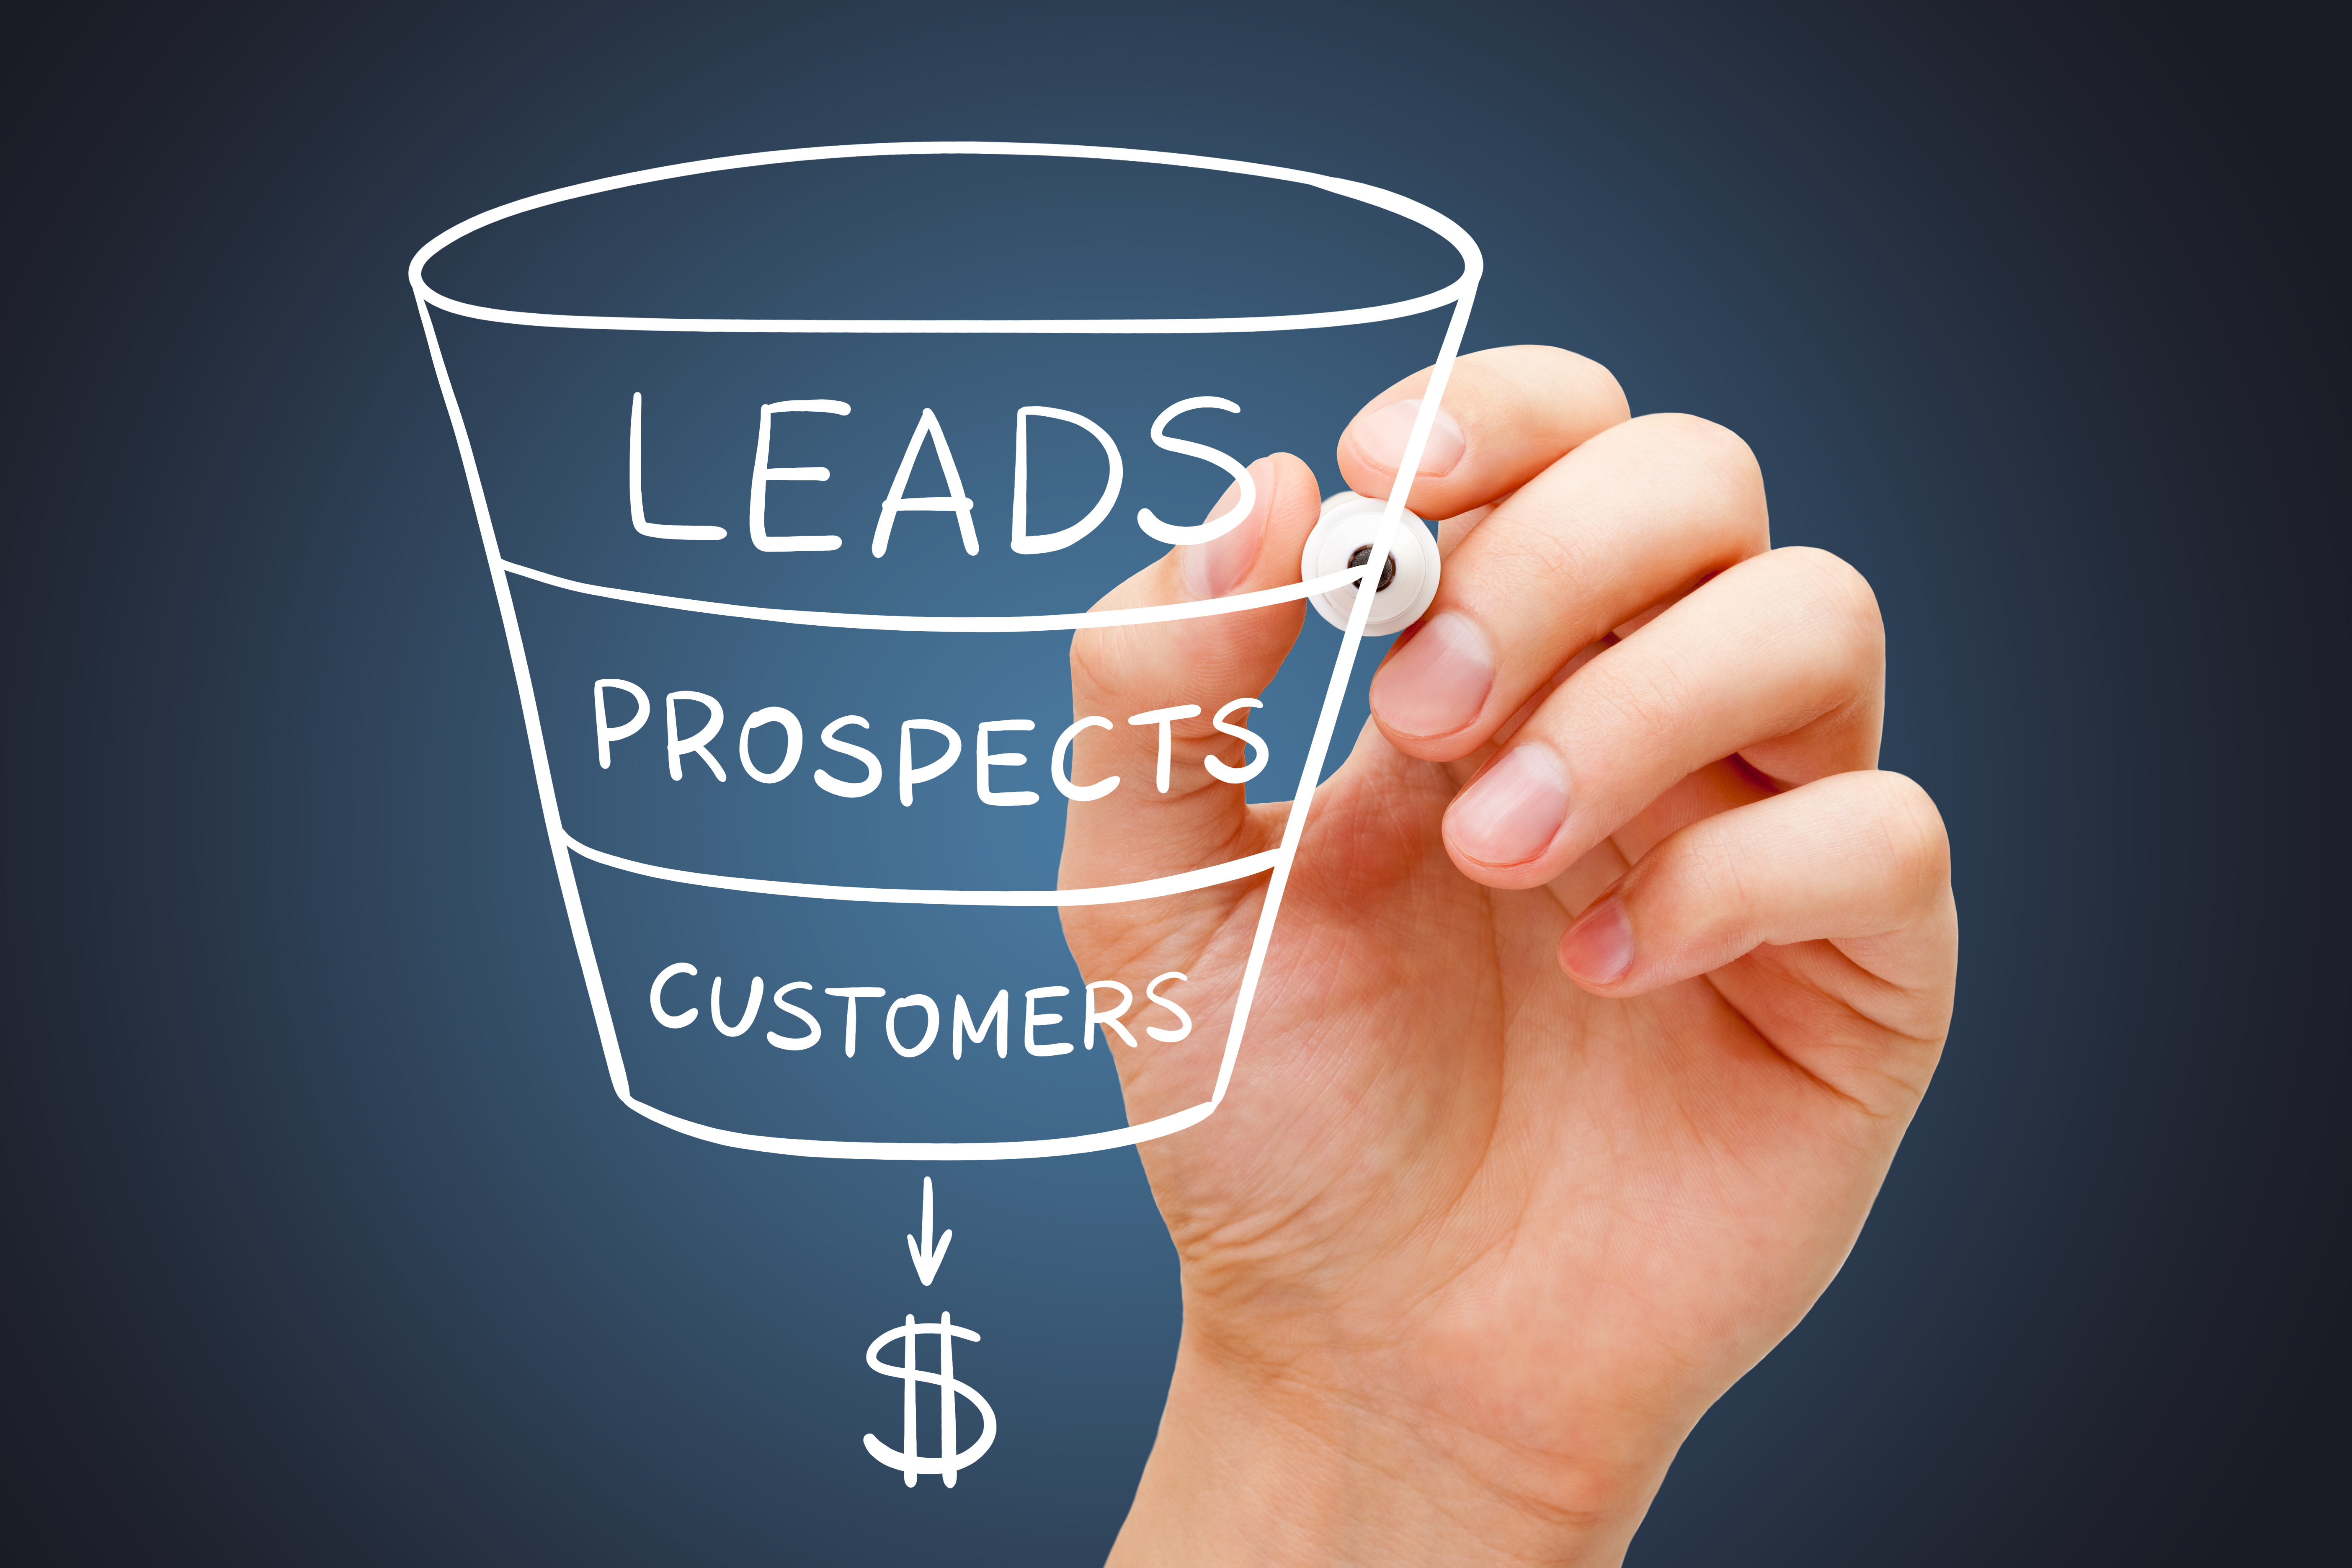 How Sales and Marketing Alignment Work Together to Close More Leads | Vendilli Digital Group